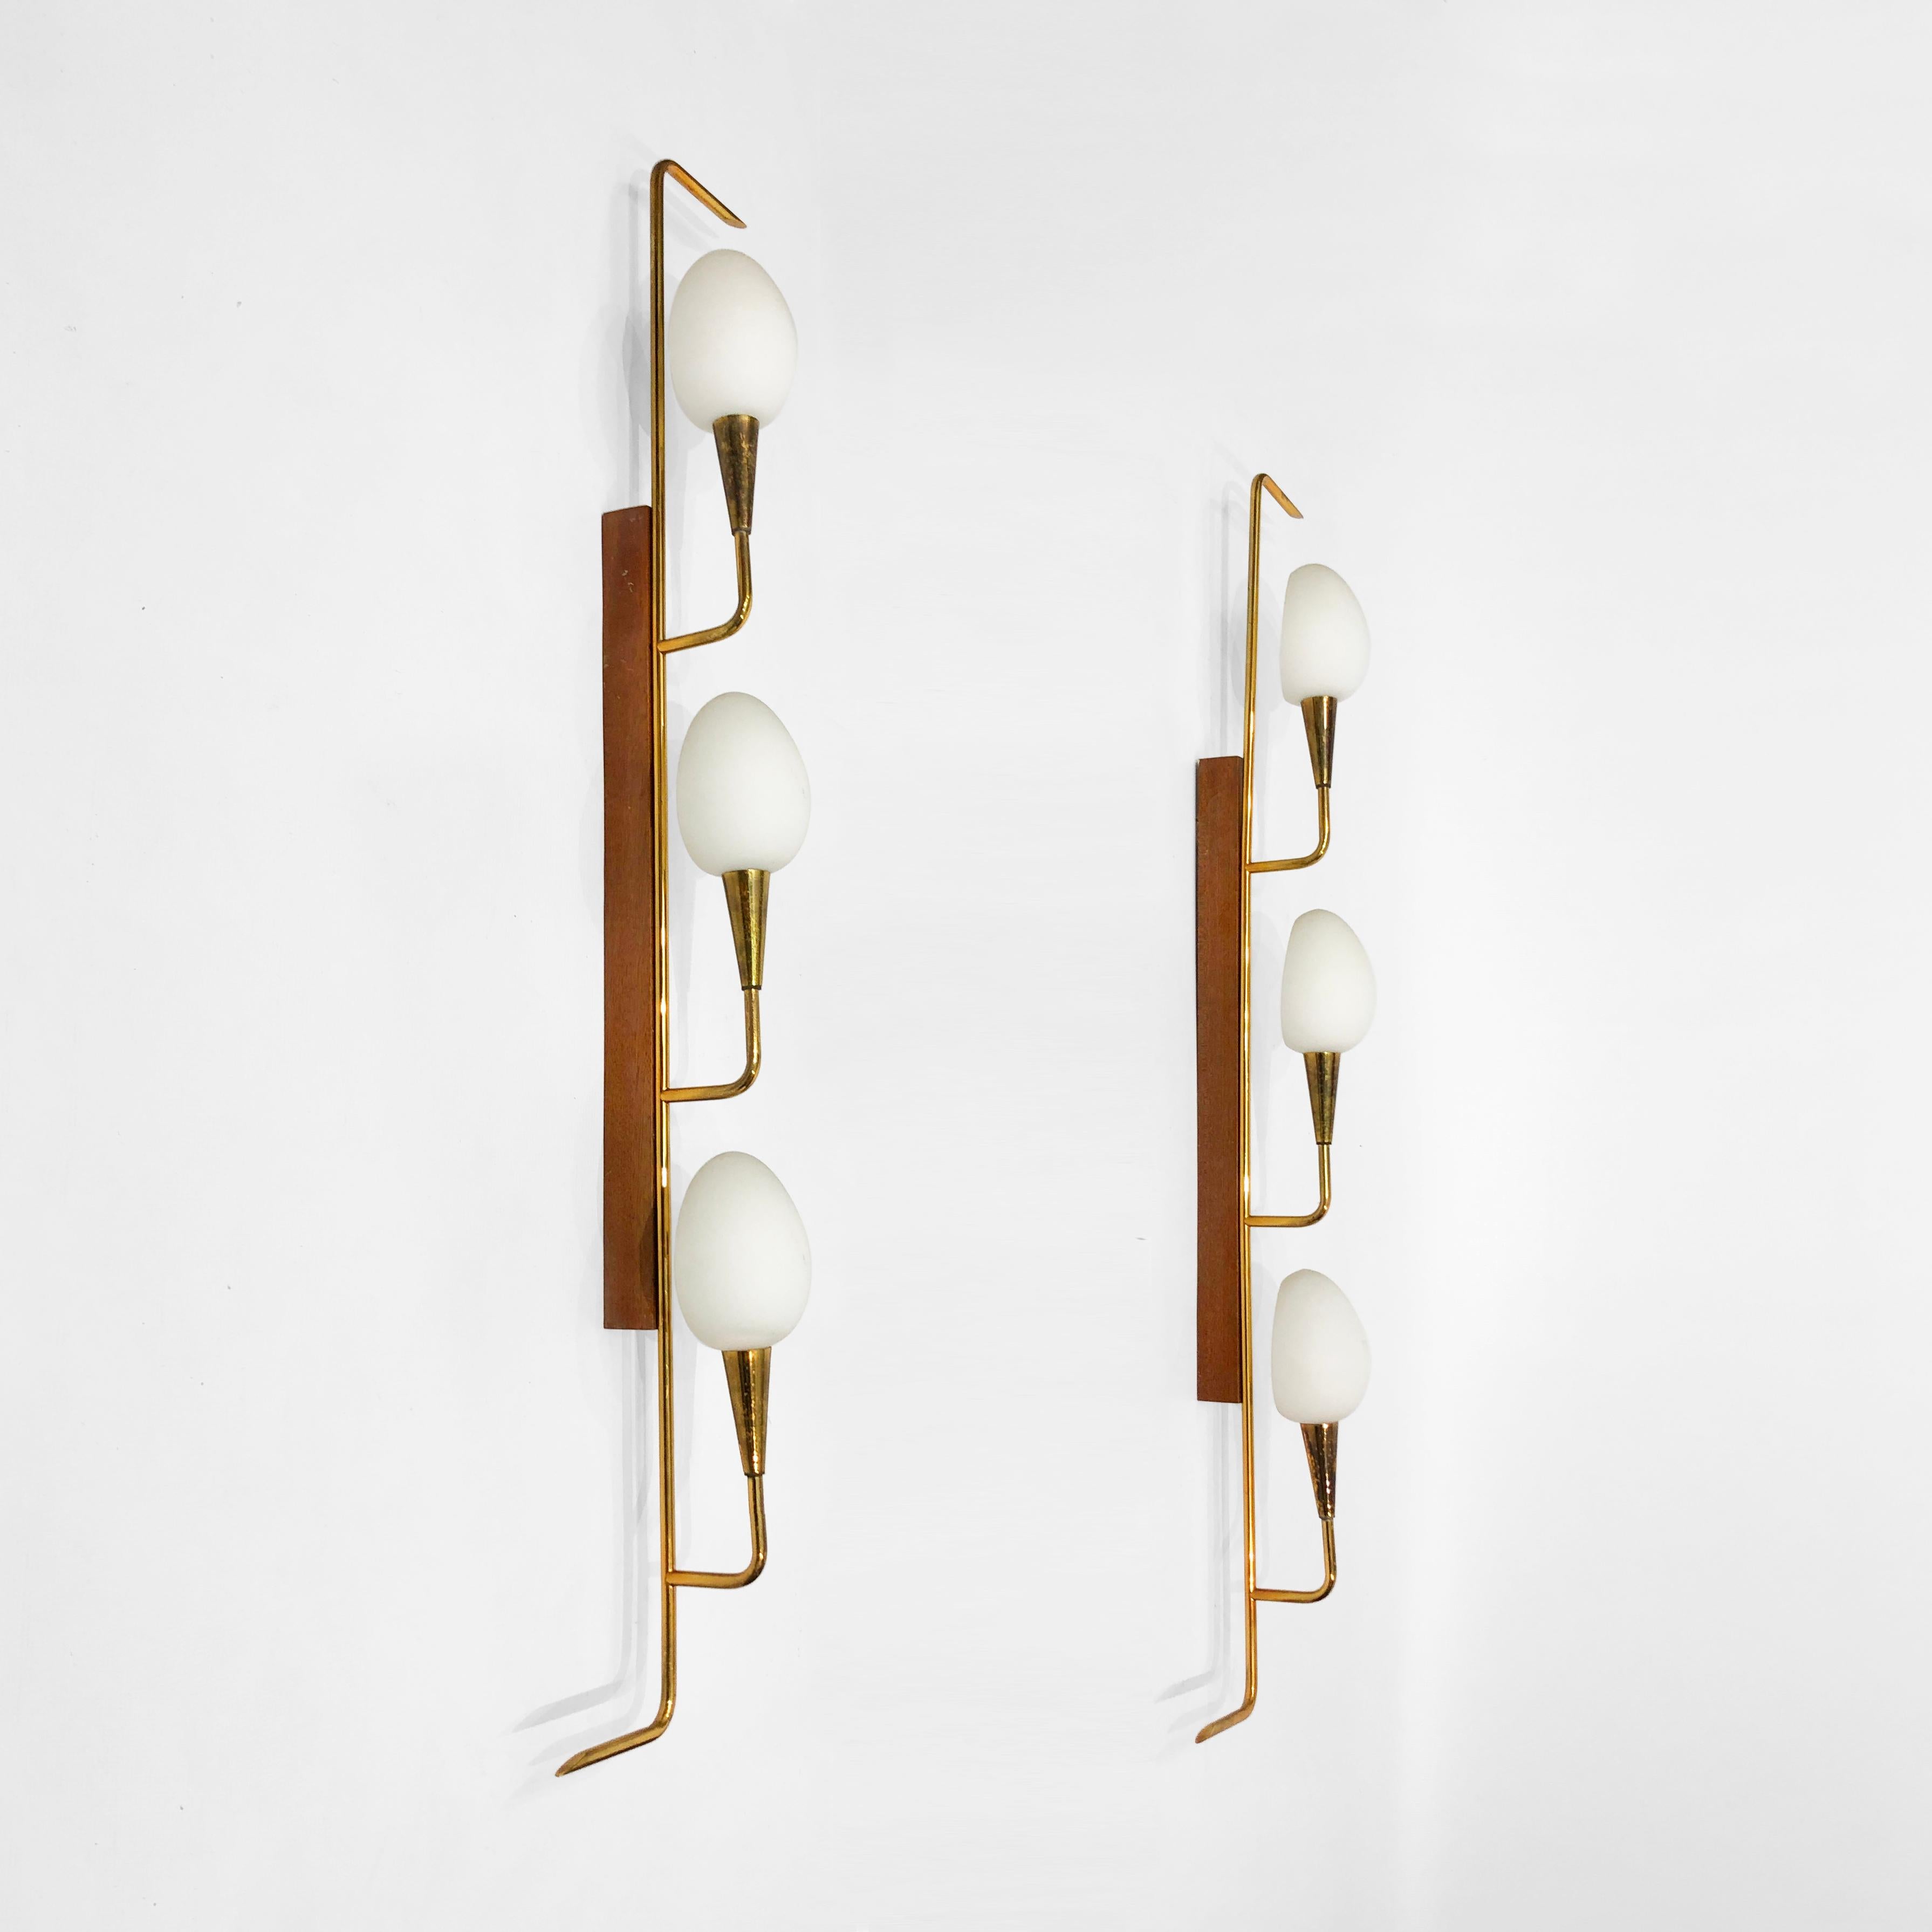 An impressive pair of 1950s mid-century wall lights by Maison Lunel, imported from an estate in Bari, Italy. A teak spine supports a brass frame, from which protrudes three branch-like brass cones, each holding an egg-shaped glass shade. The brass